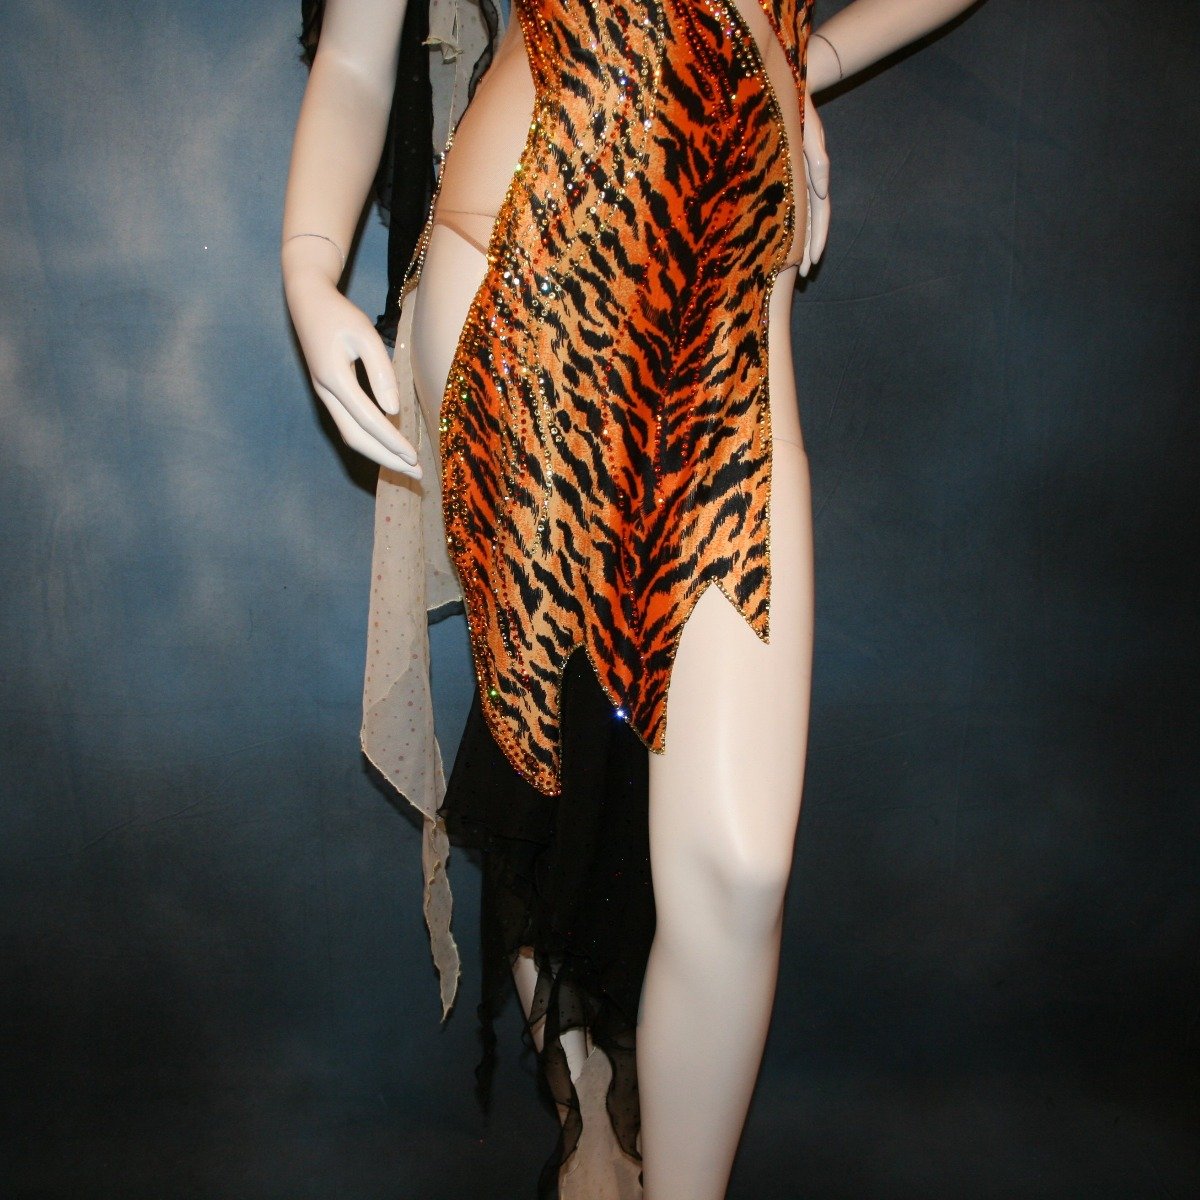 Crystal's Creations close up bottom view of orange & black tiger print Latin/rhythm dress with pale yellow accents